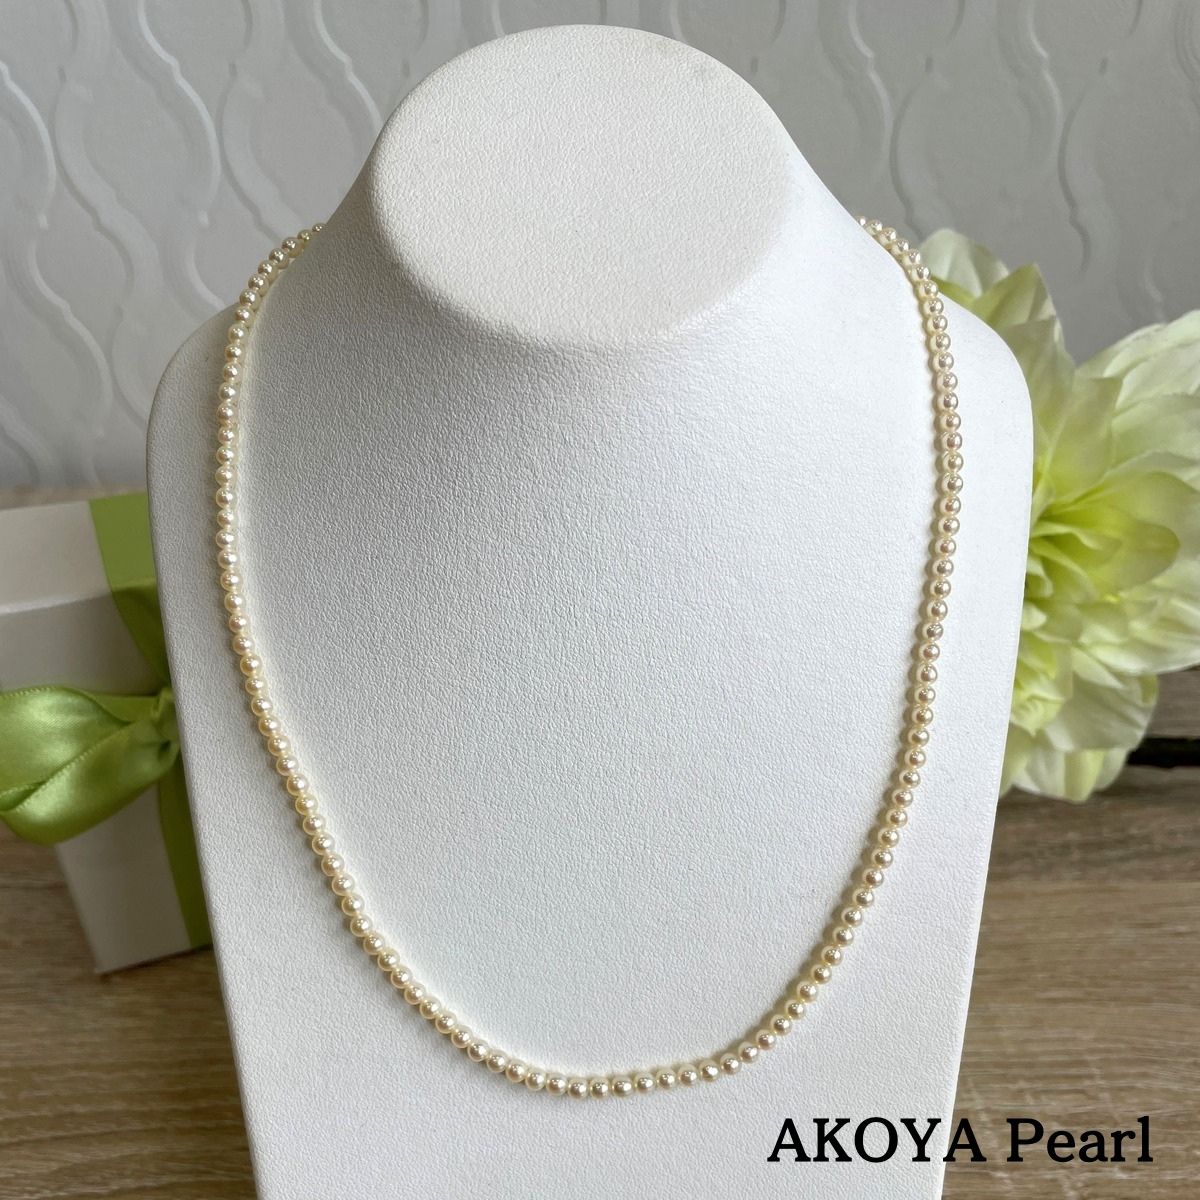 [AKOYA pearl] K18 babypearl necklace appropximately 40cm es-018